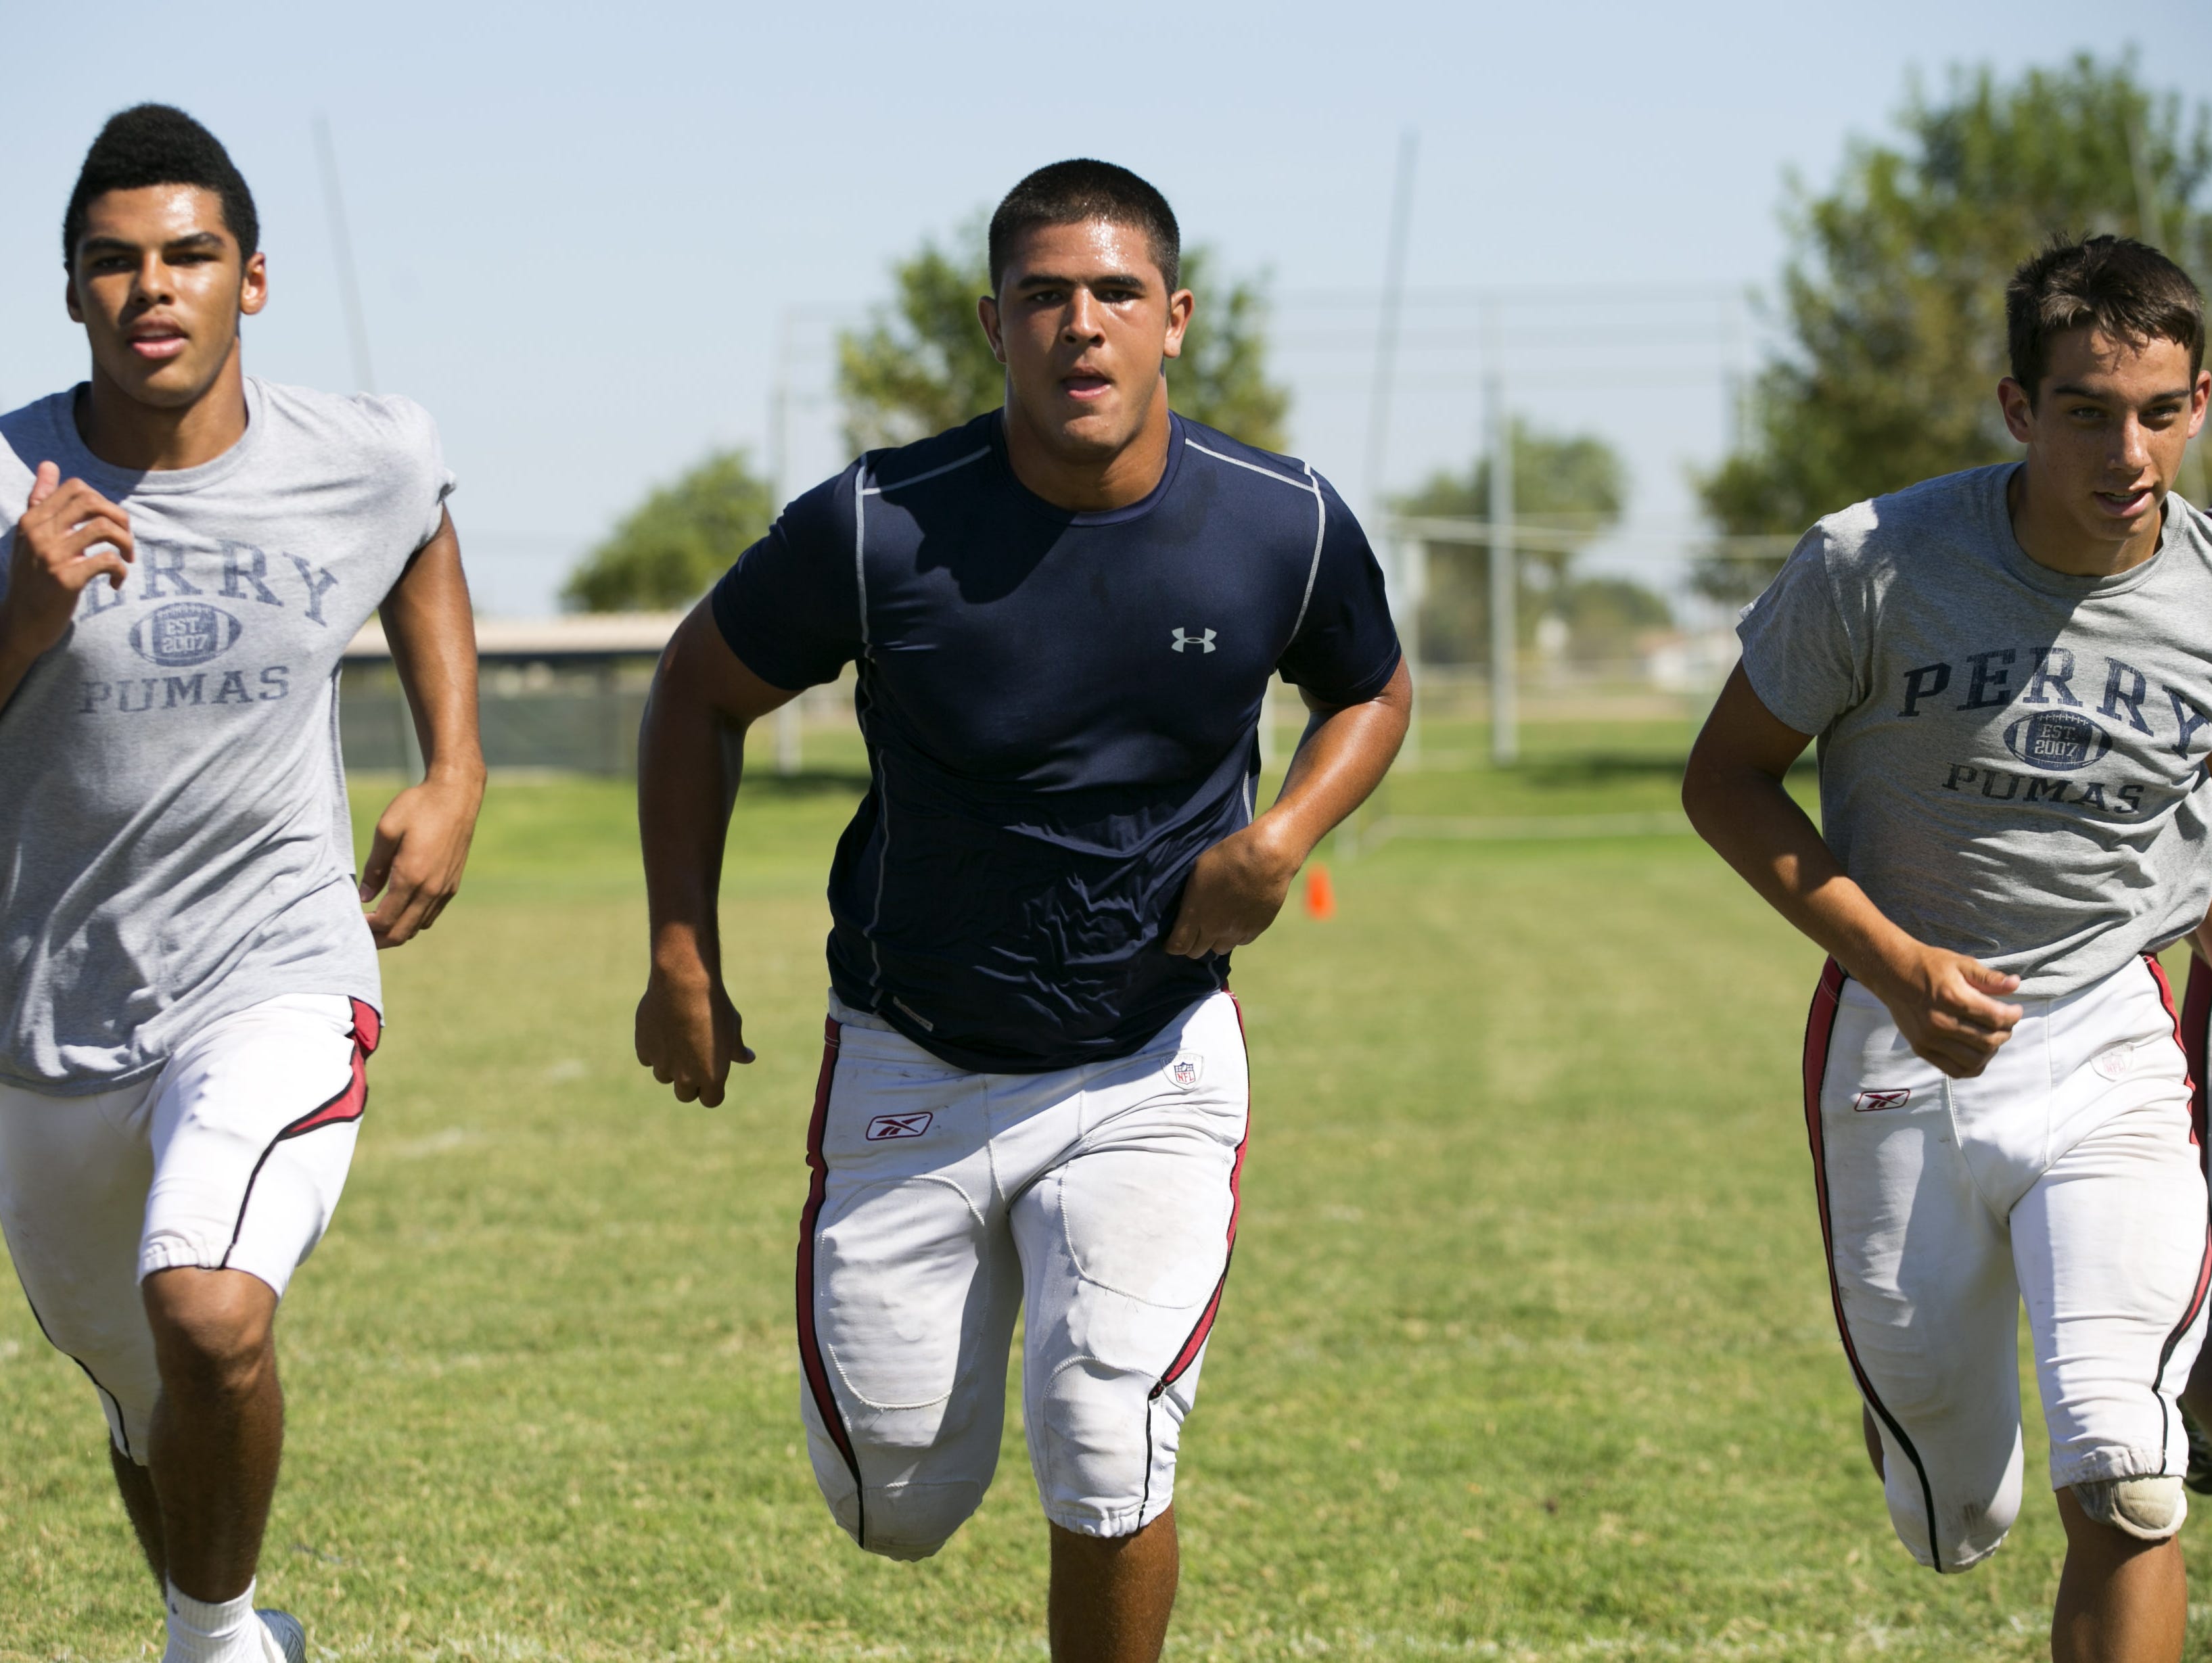 Perry High defensive lineman Saxton Simmons (center) during football practice at Perry High School in Gilbert on Tuesday, September 29, 2015.